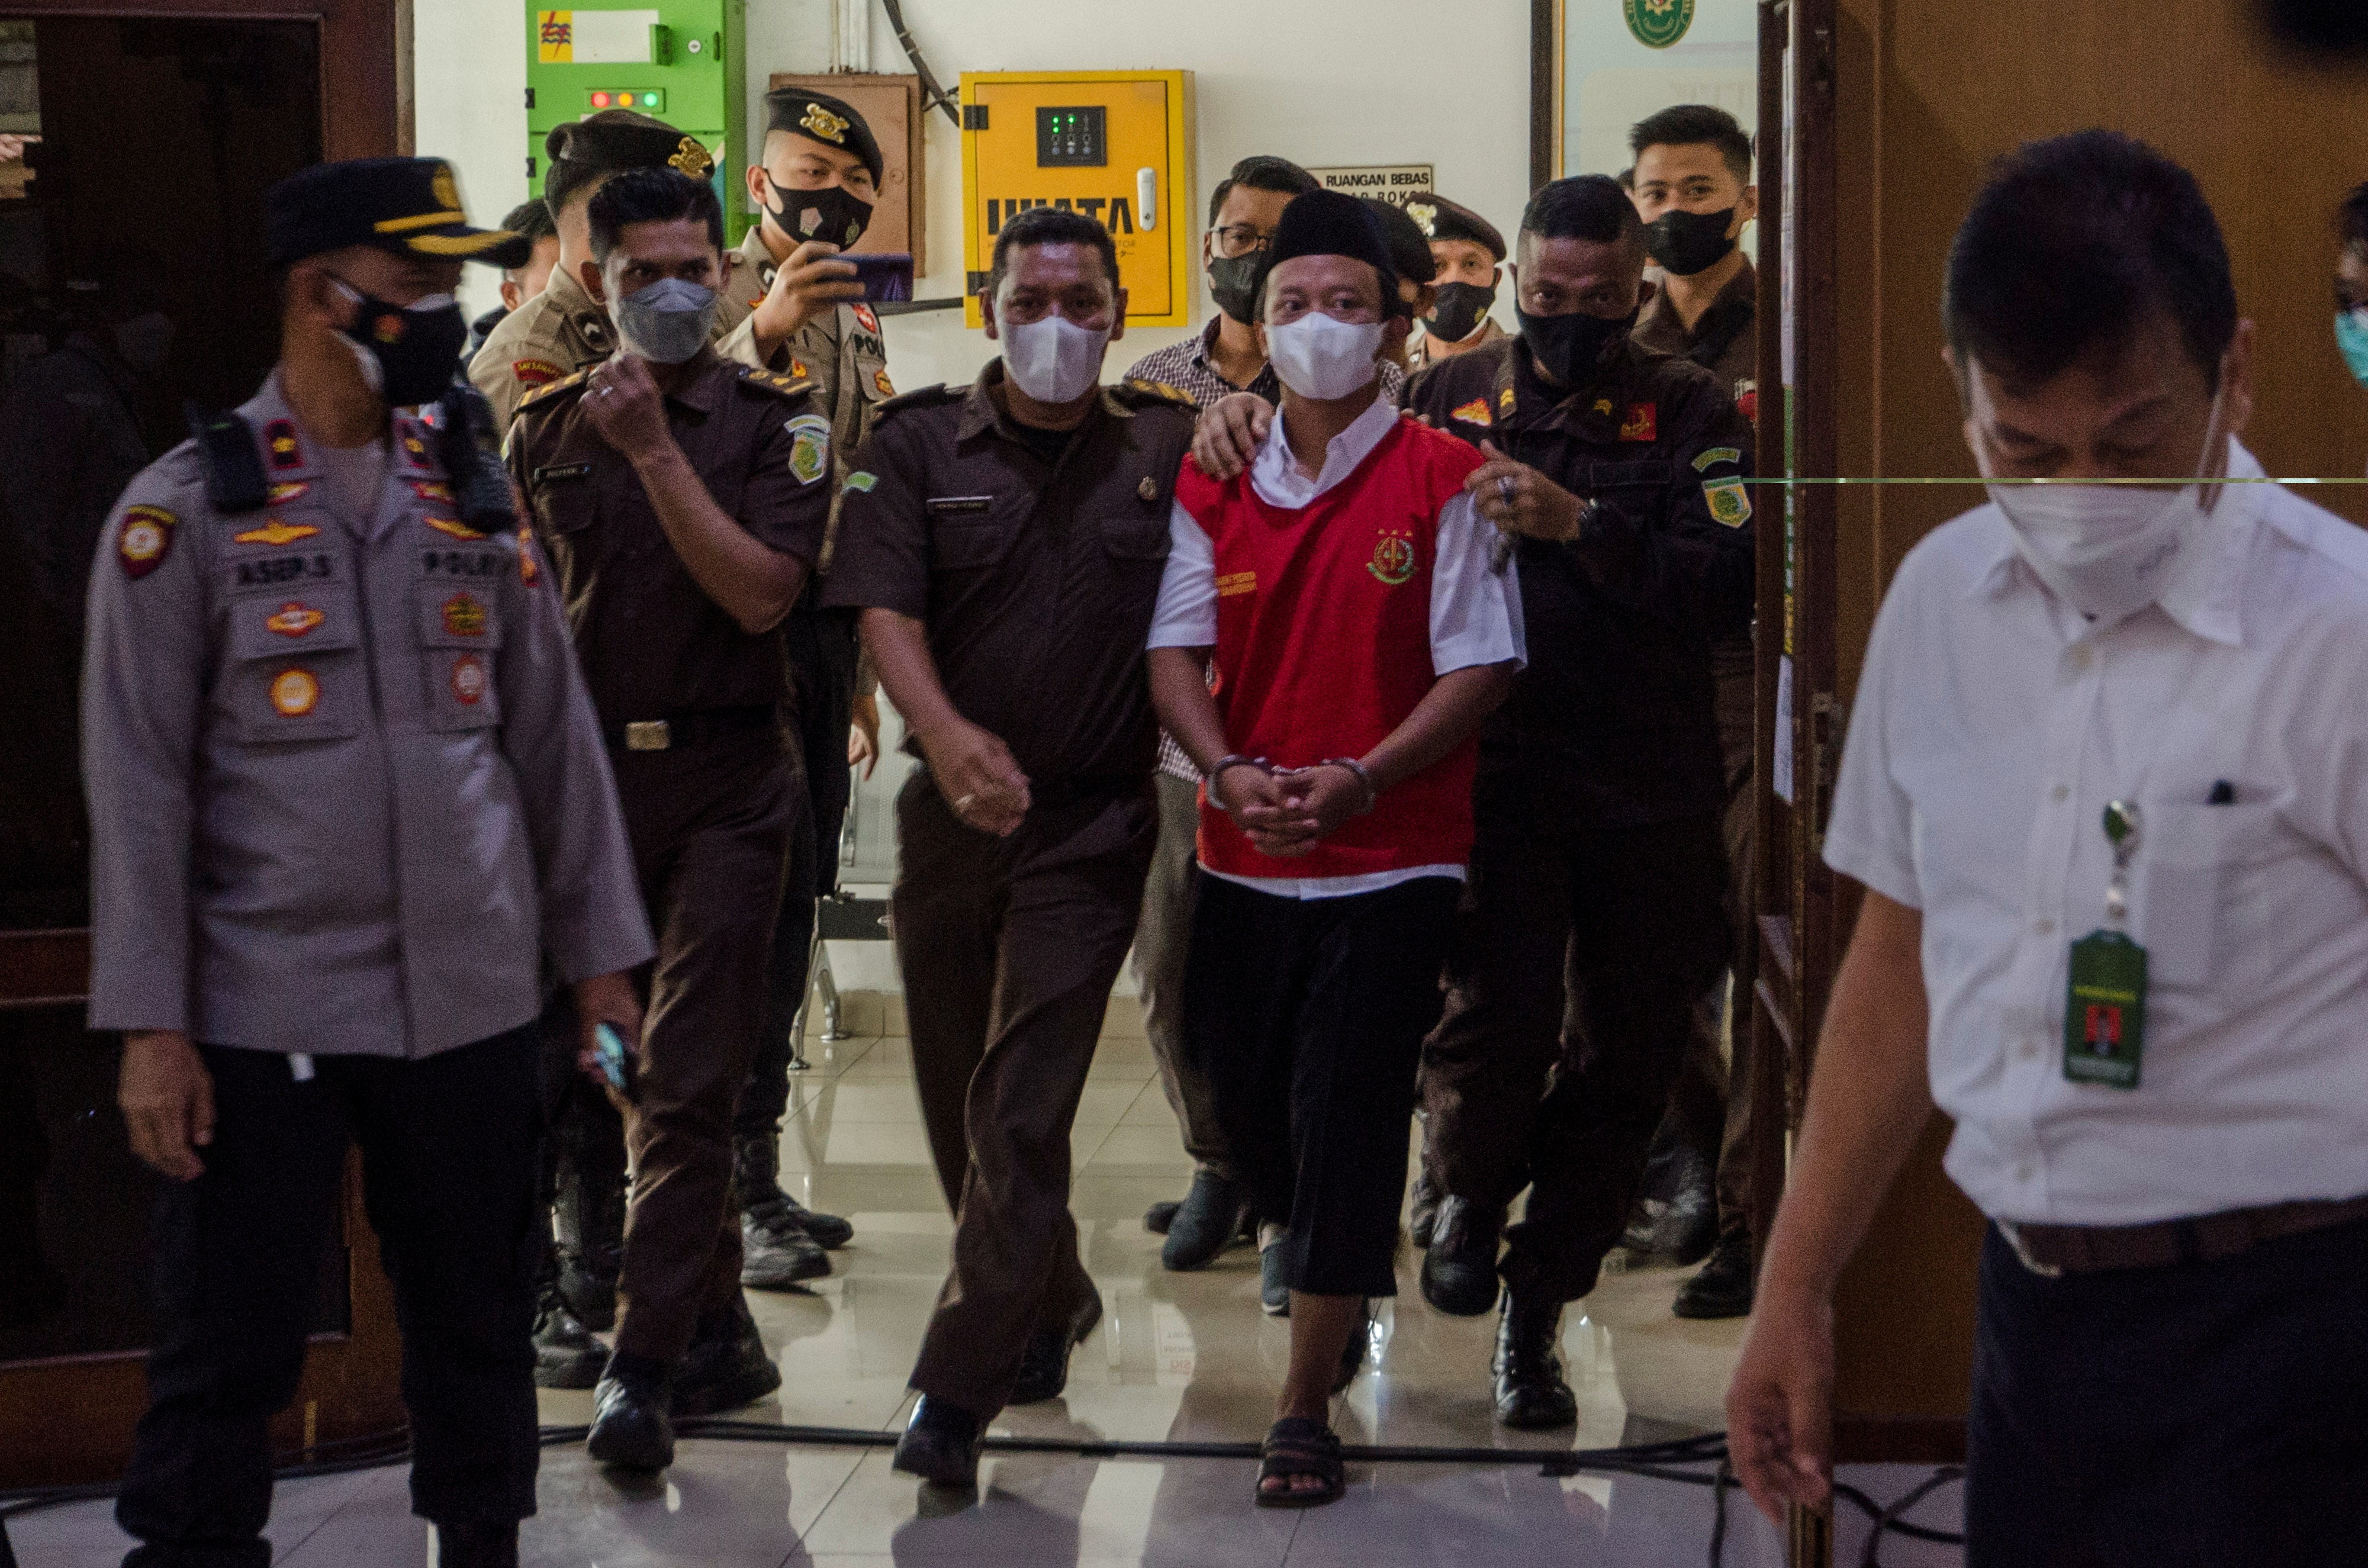 Indonesian teacher sentenced to death for raping 13 students, impregnating 8 of his victims